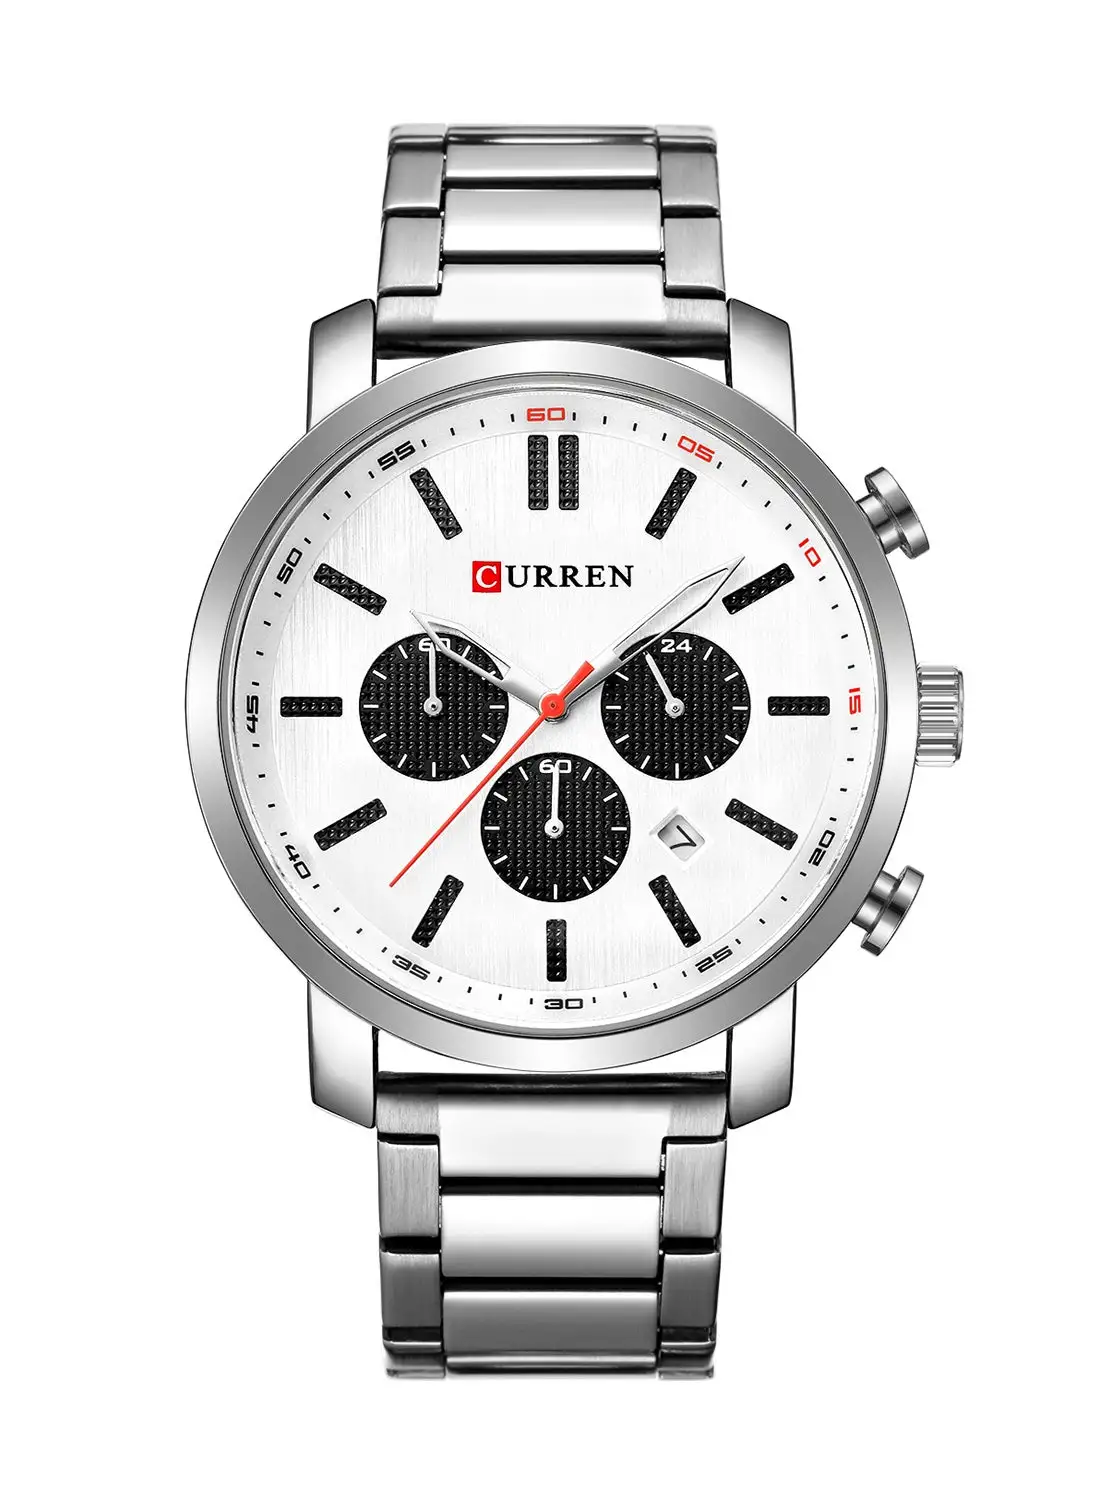 CURREN Men's Chronograph Waterproof Stainless Steel BAnd Casual Quartz Watch 8315 - 46 mm - Silver